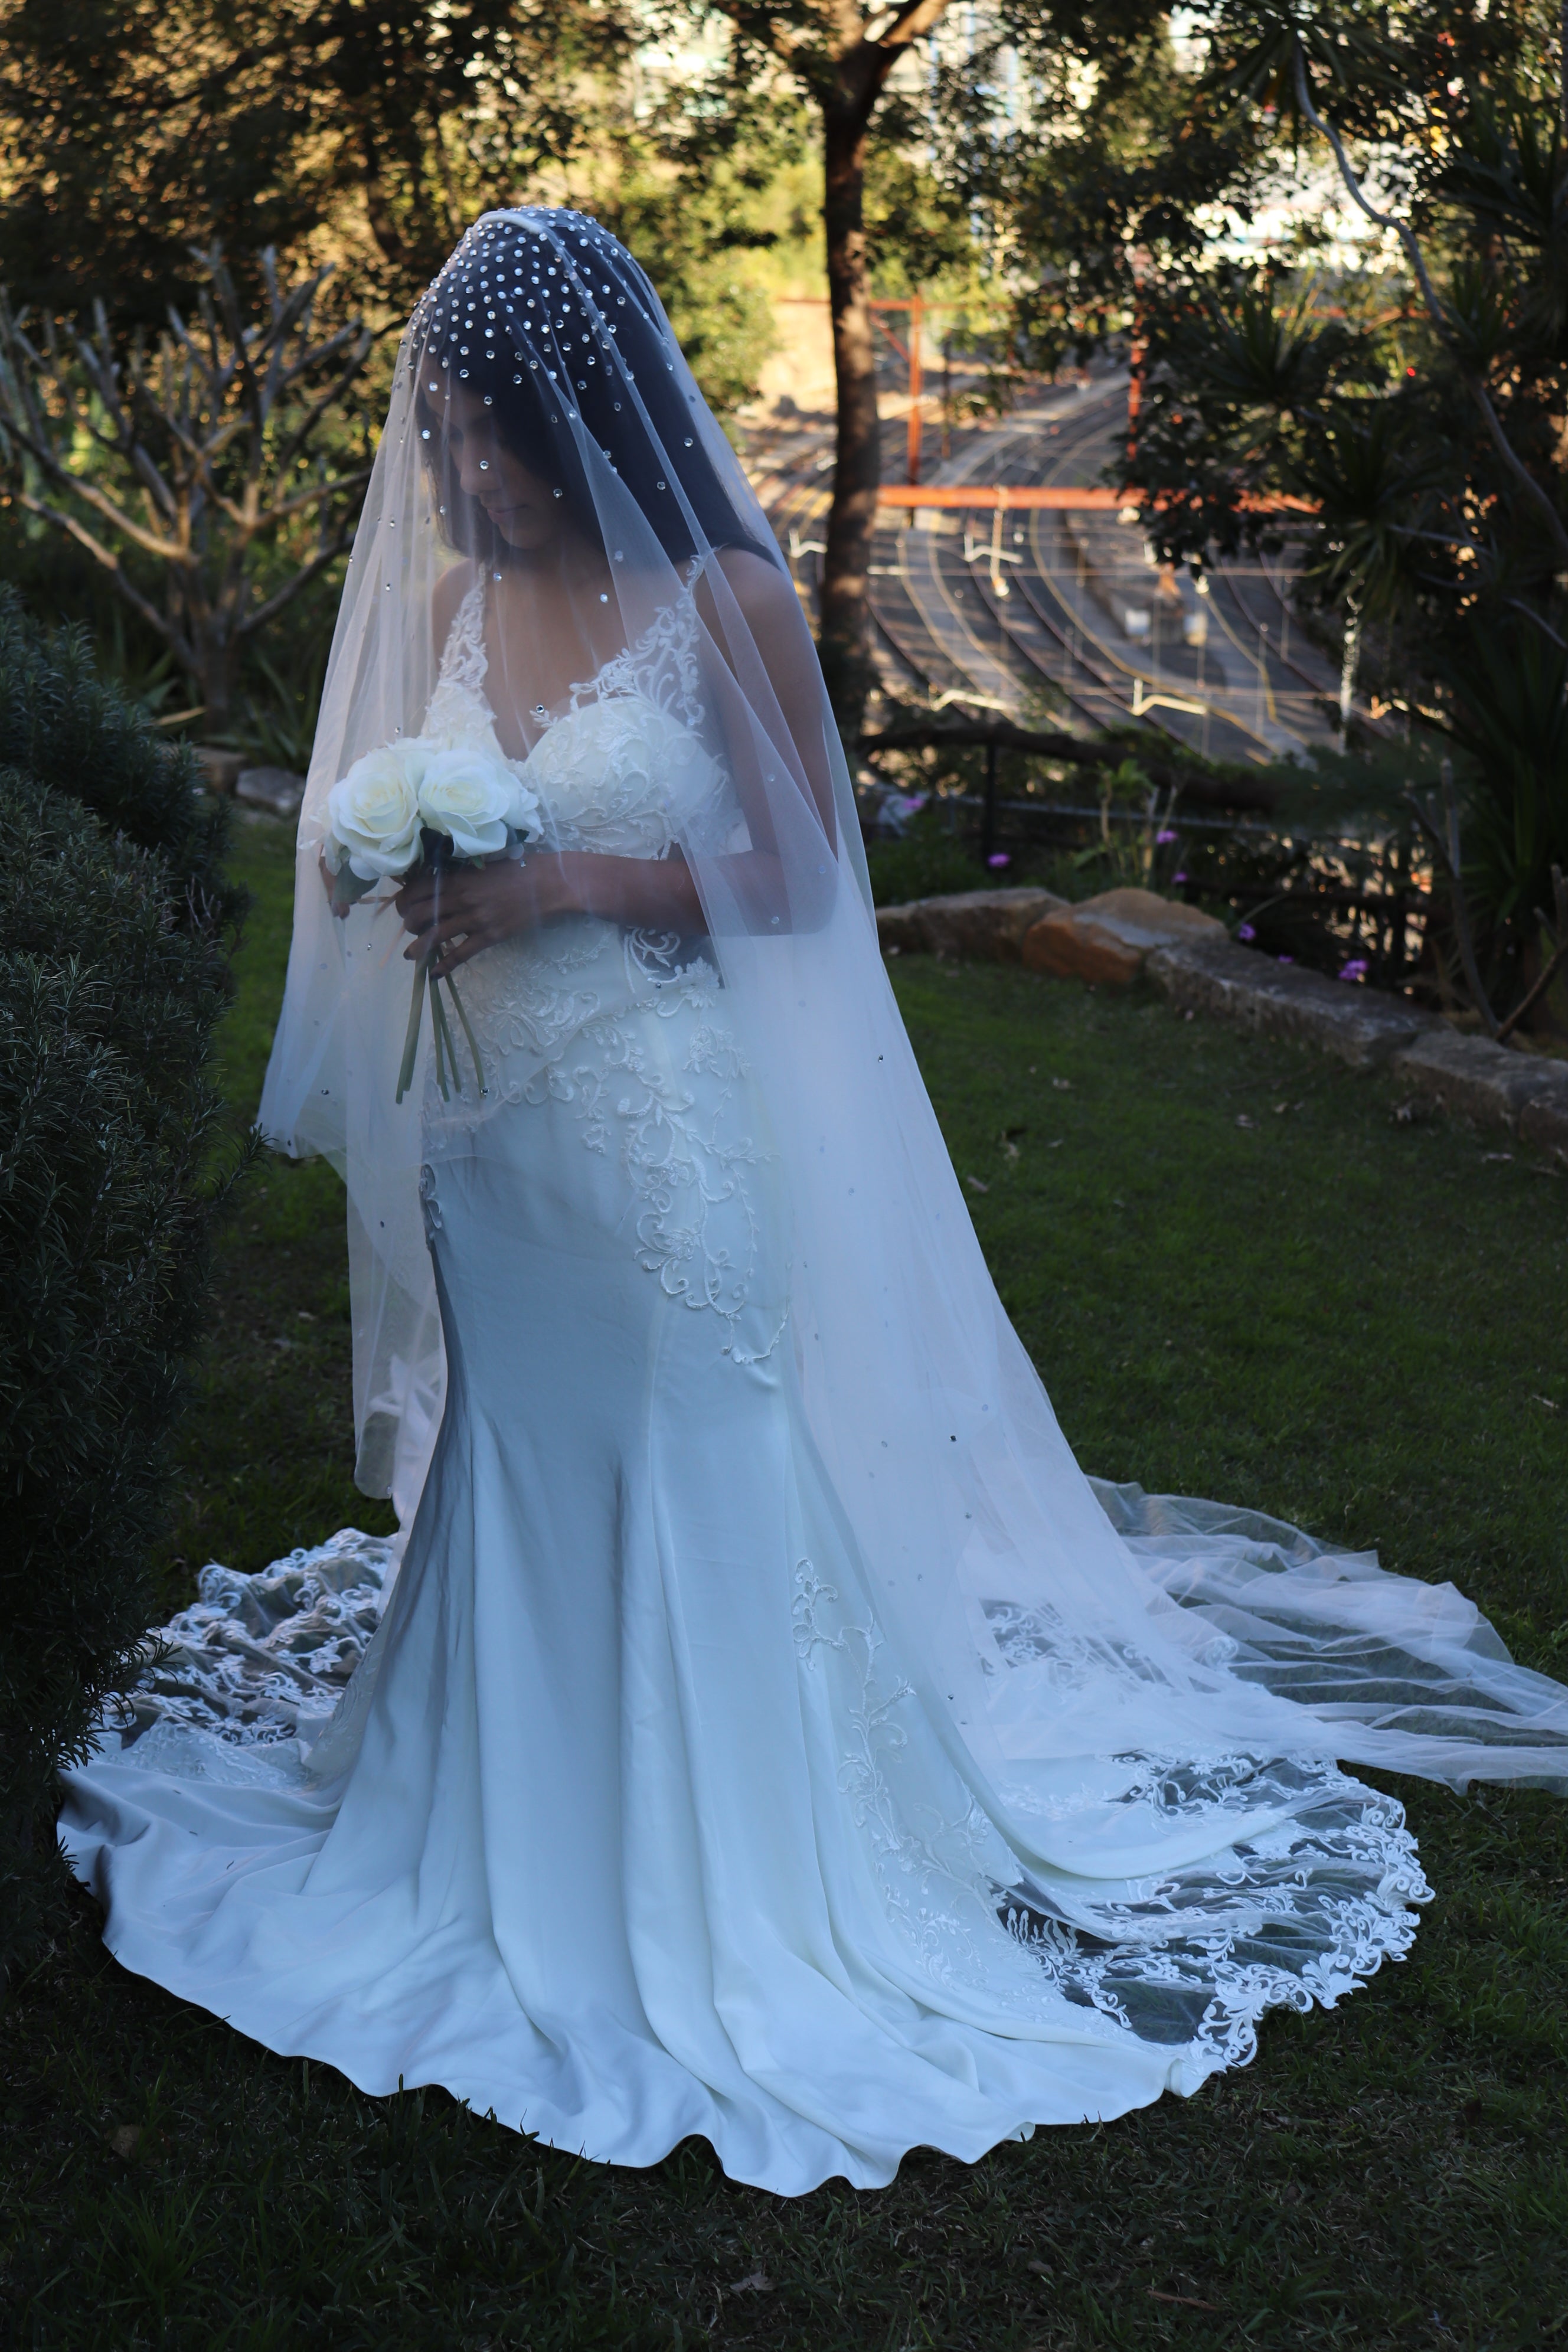 Isla - two layer floor length veil with a cut edge & scattered pearls